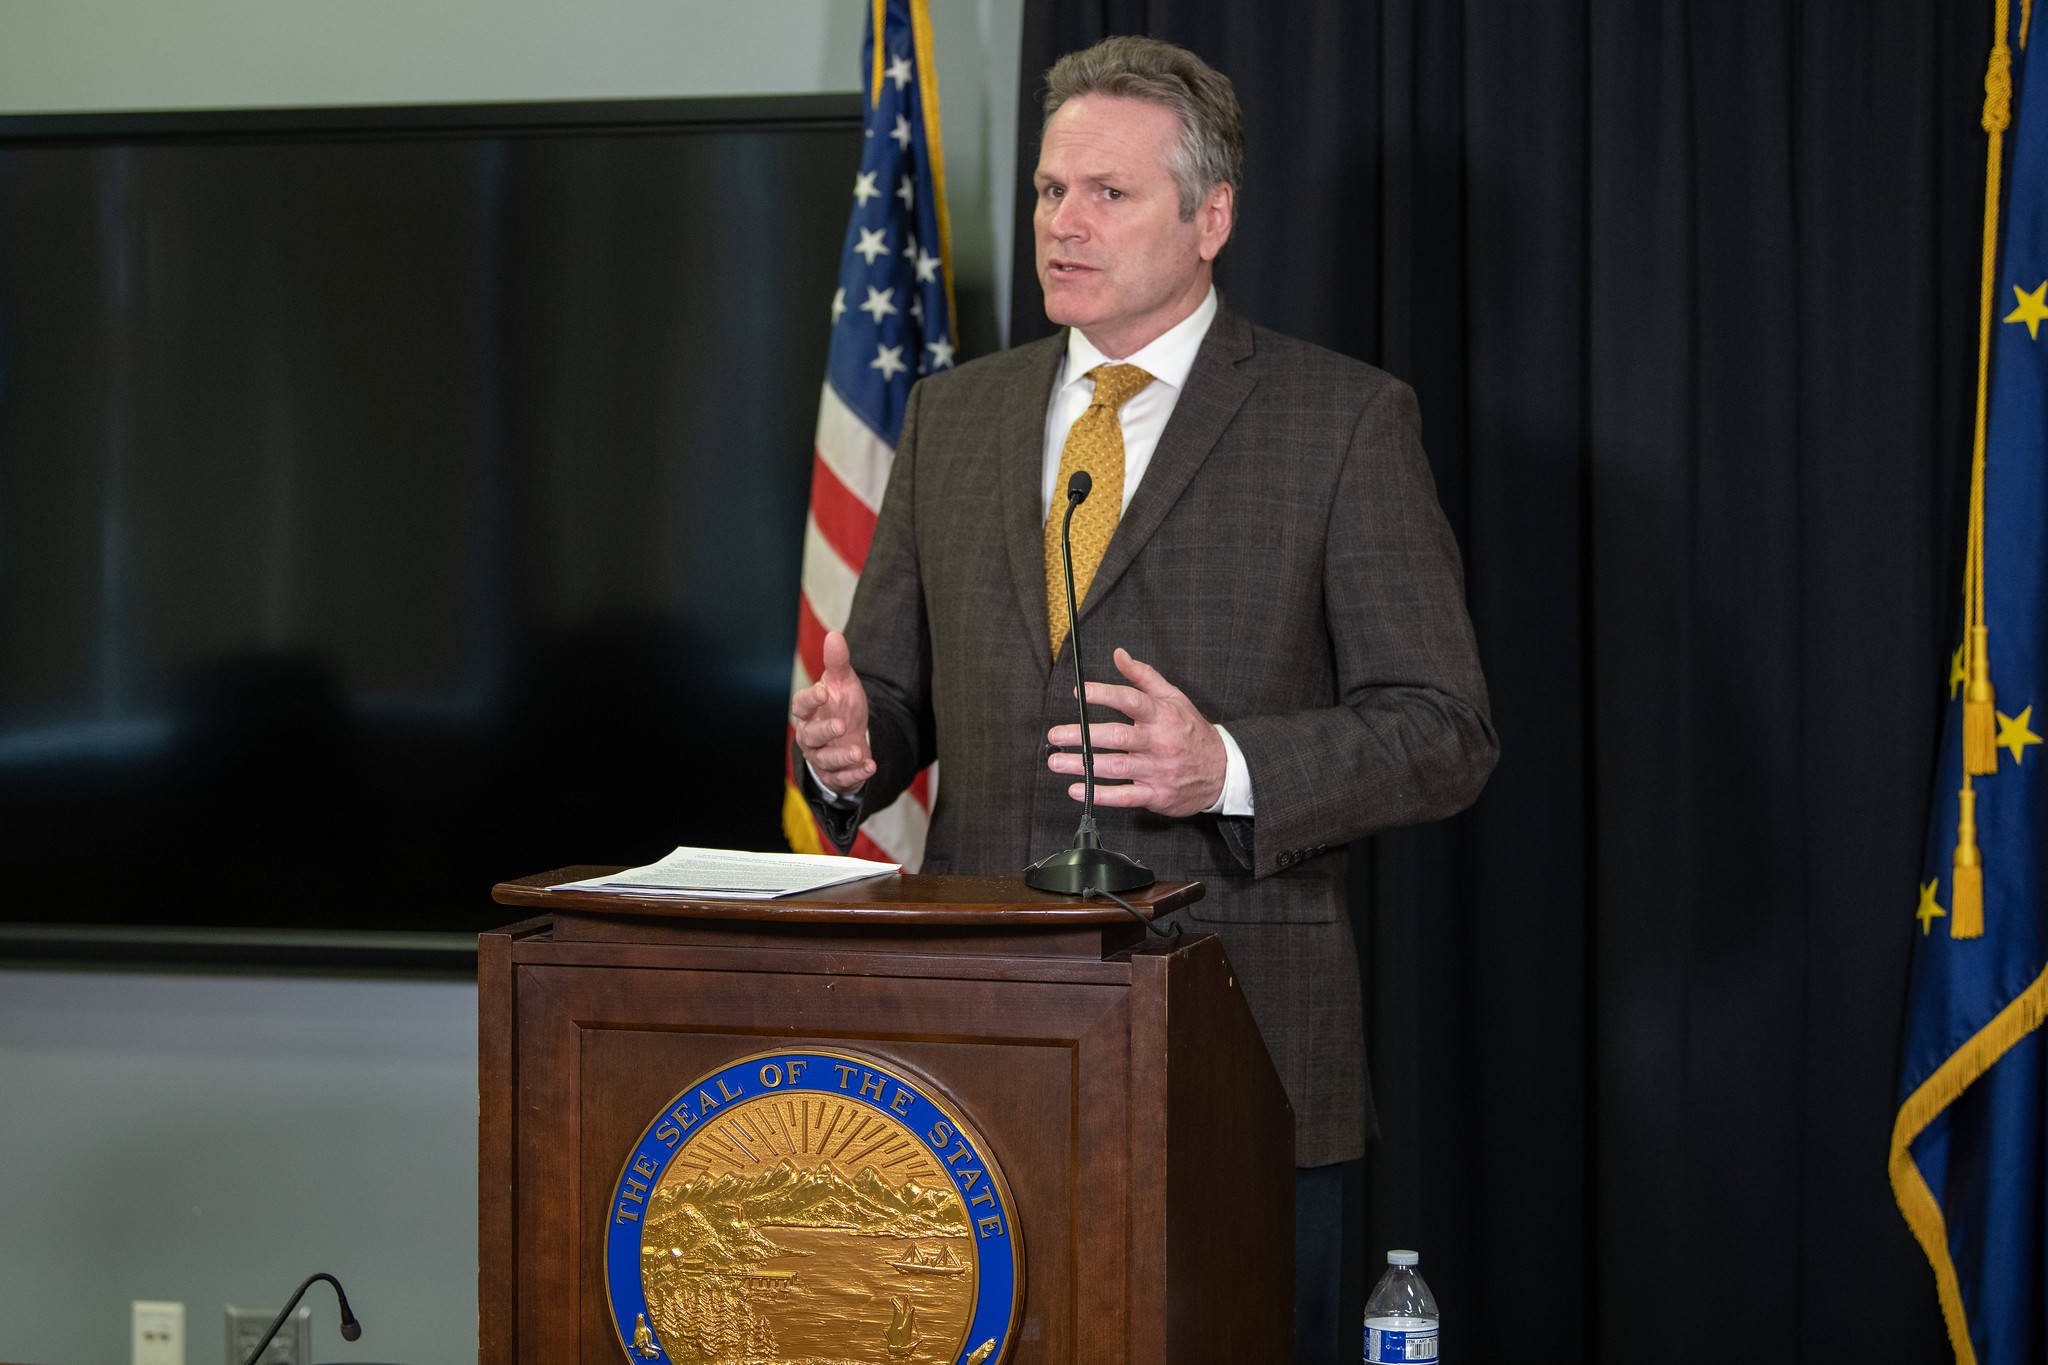 Gov. Mike Dunleavy speaks at a press conference in Anchorage on Tuesday, April 7, 2020. (Courtesy photo | Office of Gov. Mike Dunleavy)